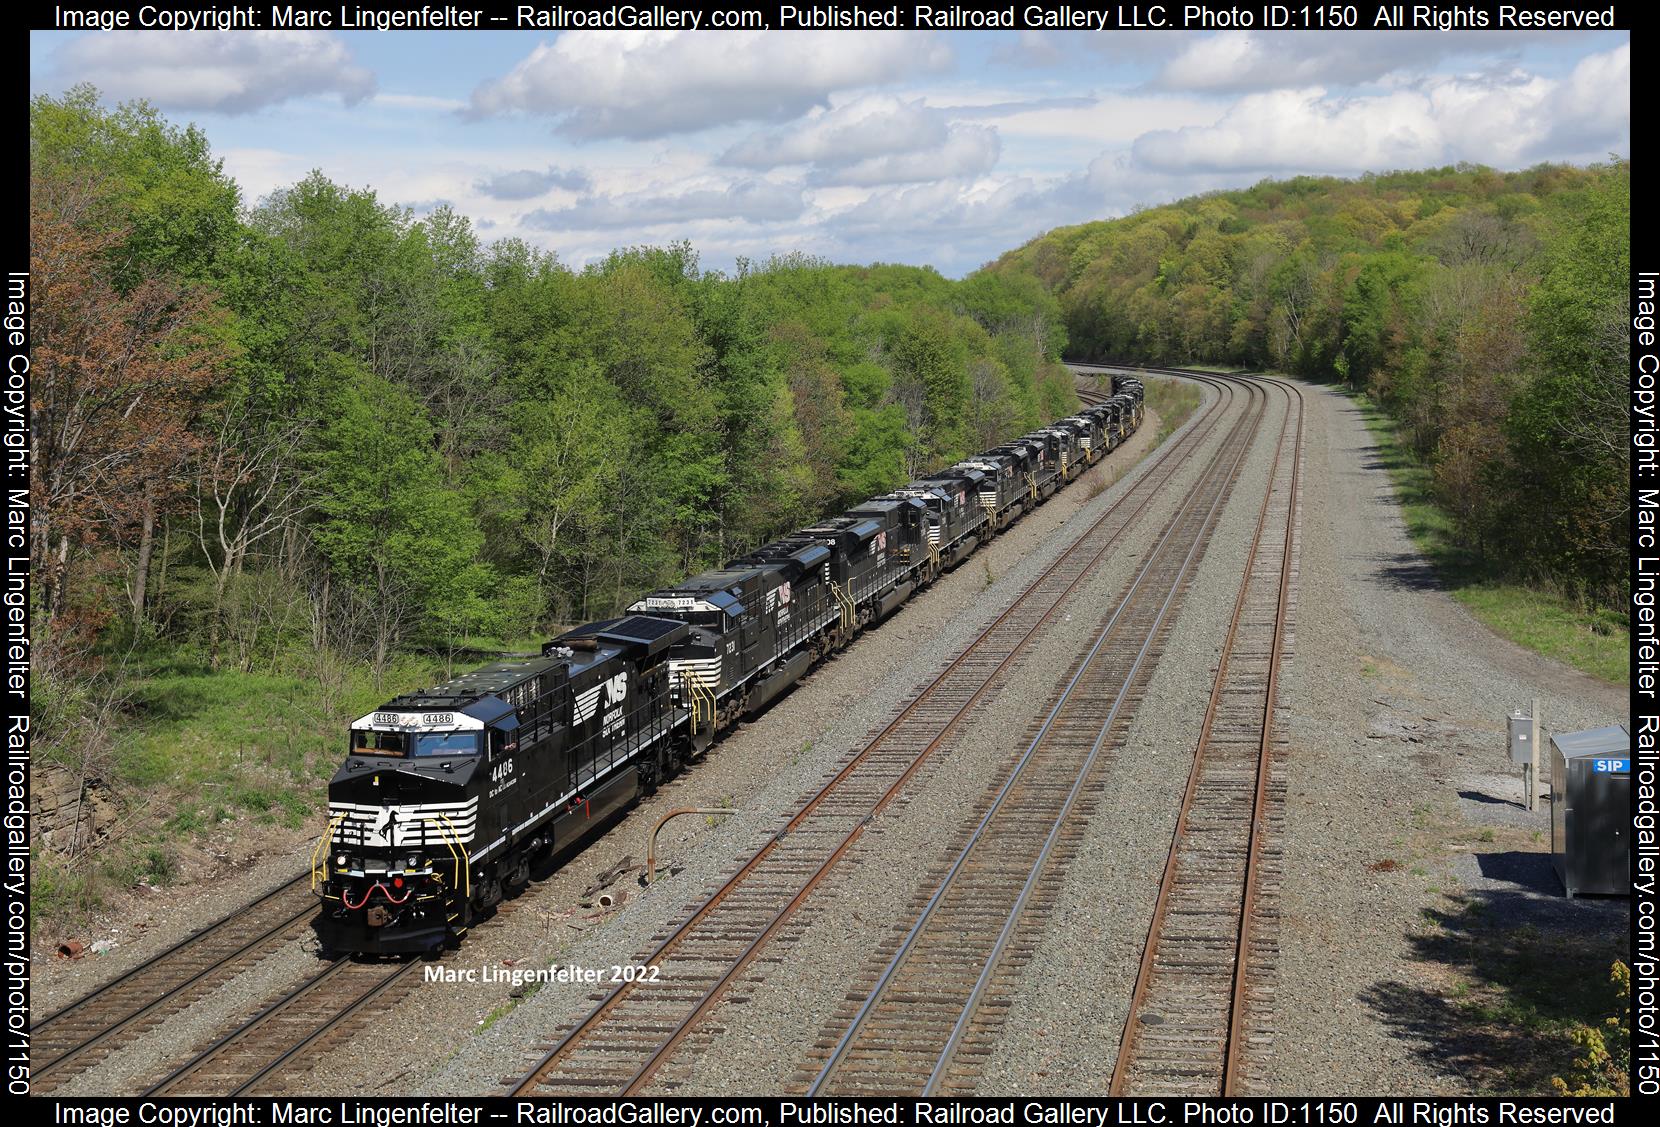 NS 4486 is a class GE AC44C6M and  is pictured in Gallitzin, Pennsylvania, USA.  This was taken along the NS Pittsburgh Line on the Norfolk Southern. Photo Copyright: Marc Lingenfelter uploaded to Railroad Gallery on 06/19/2023. This photograph of NS 4486 was taken on Sunday, May 16, 2021. All Rights Reserved. 